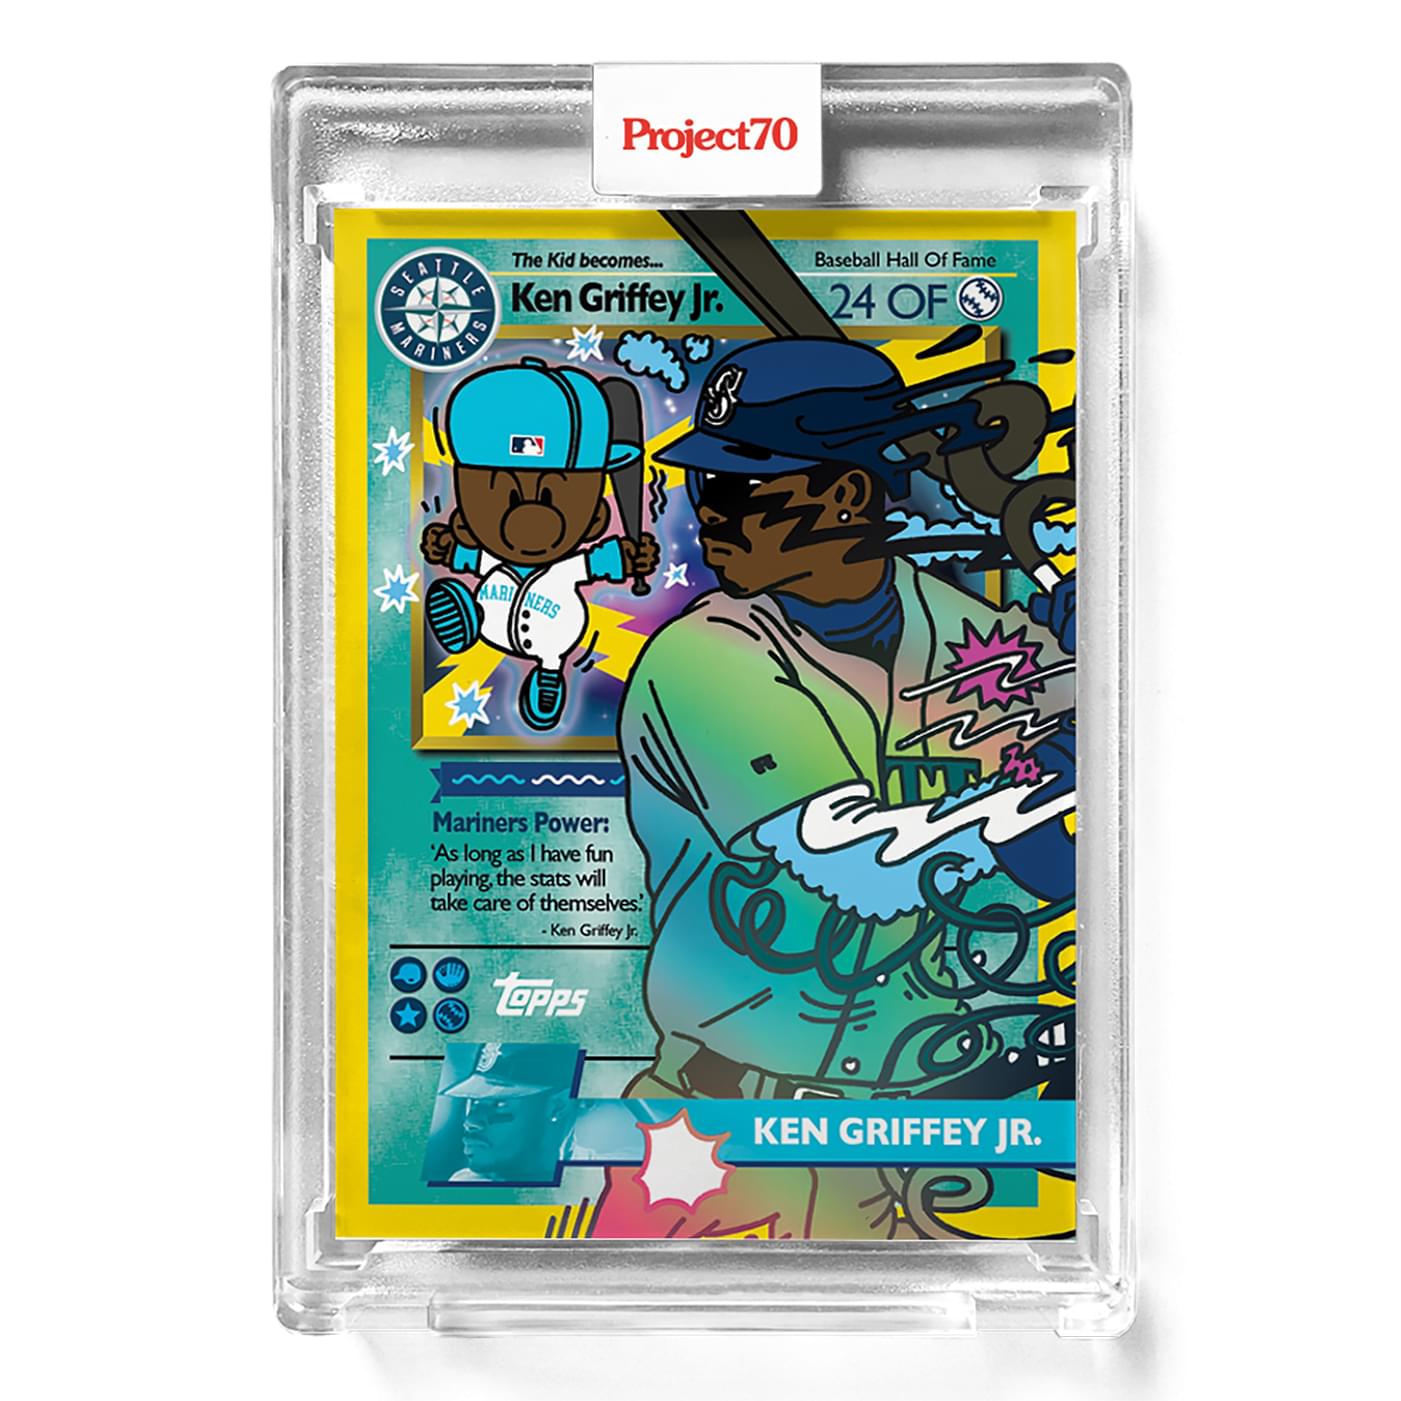 Topps Project70 Card 702 | Ken Griffey Jr. by Ermsy